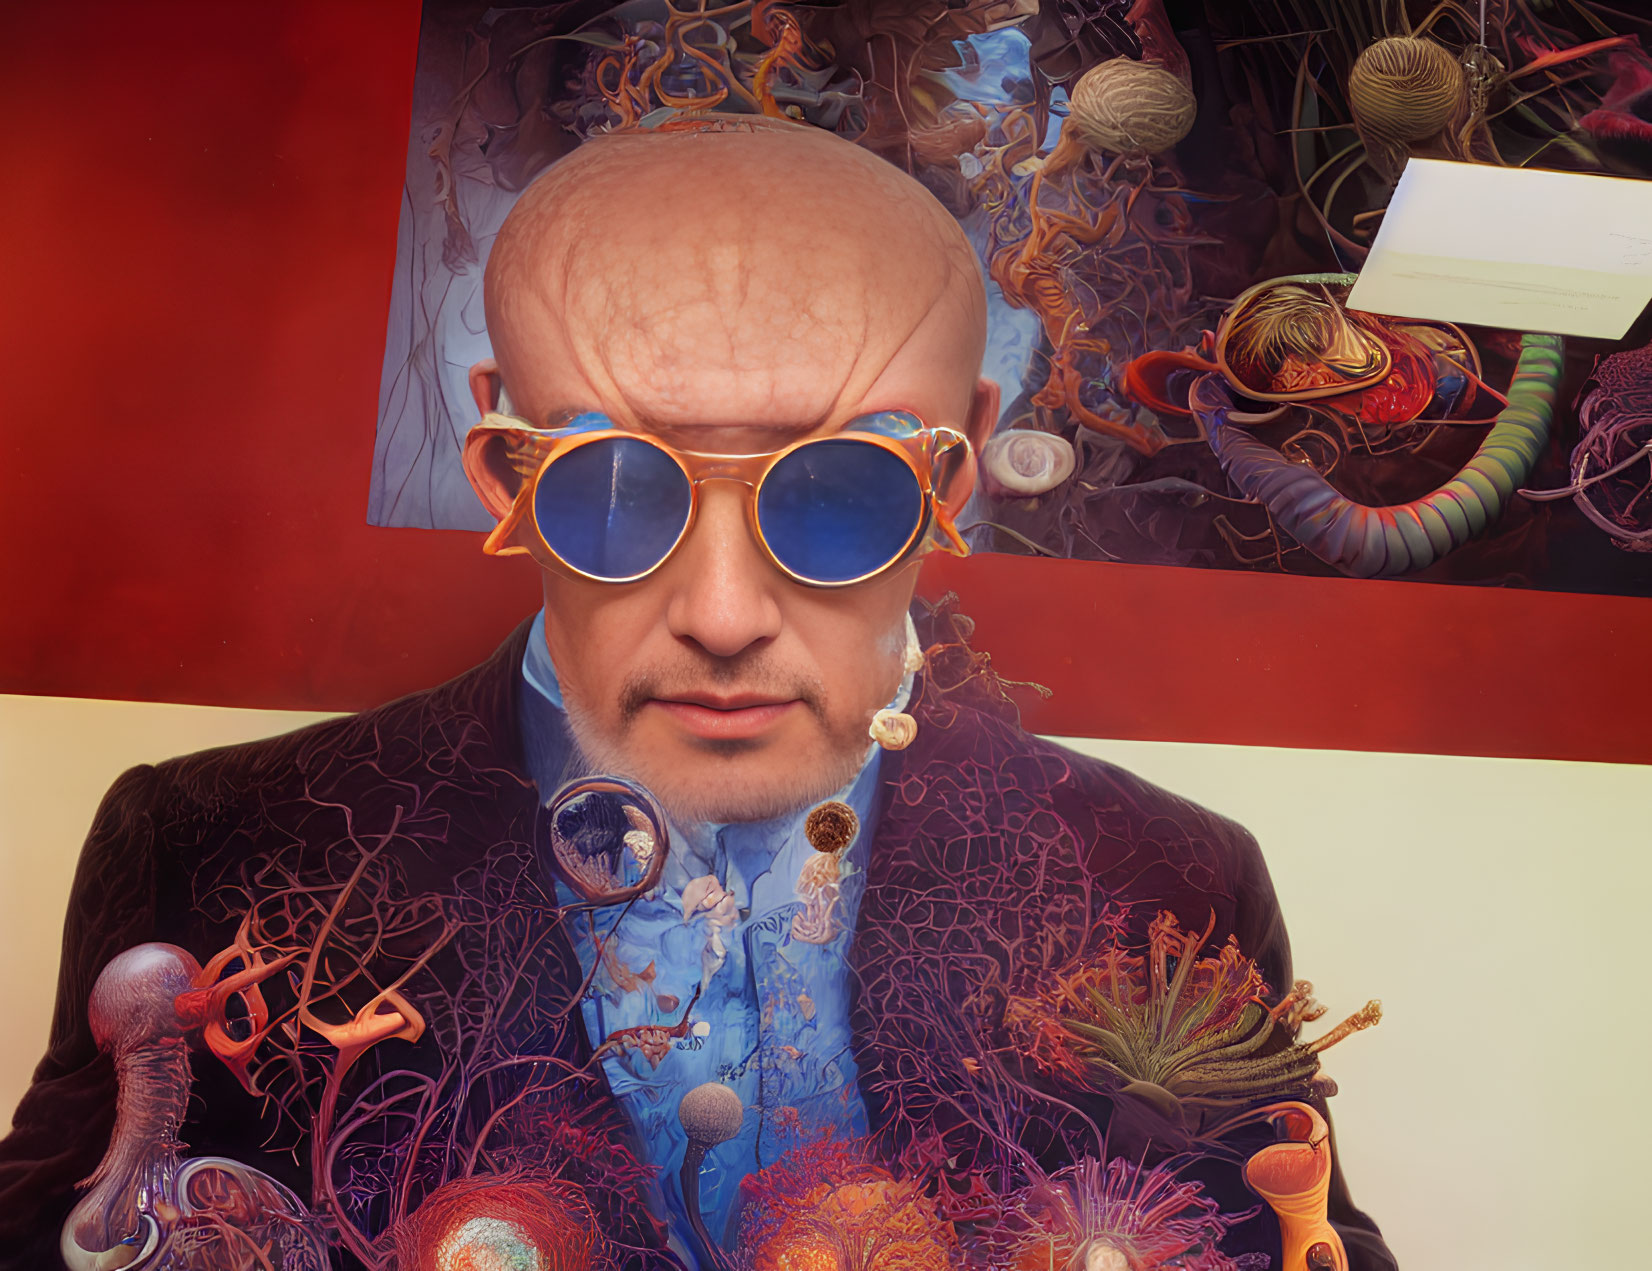 Surreal portrait of bald person with blue sunglasses and intricate, fantastical imagery